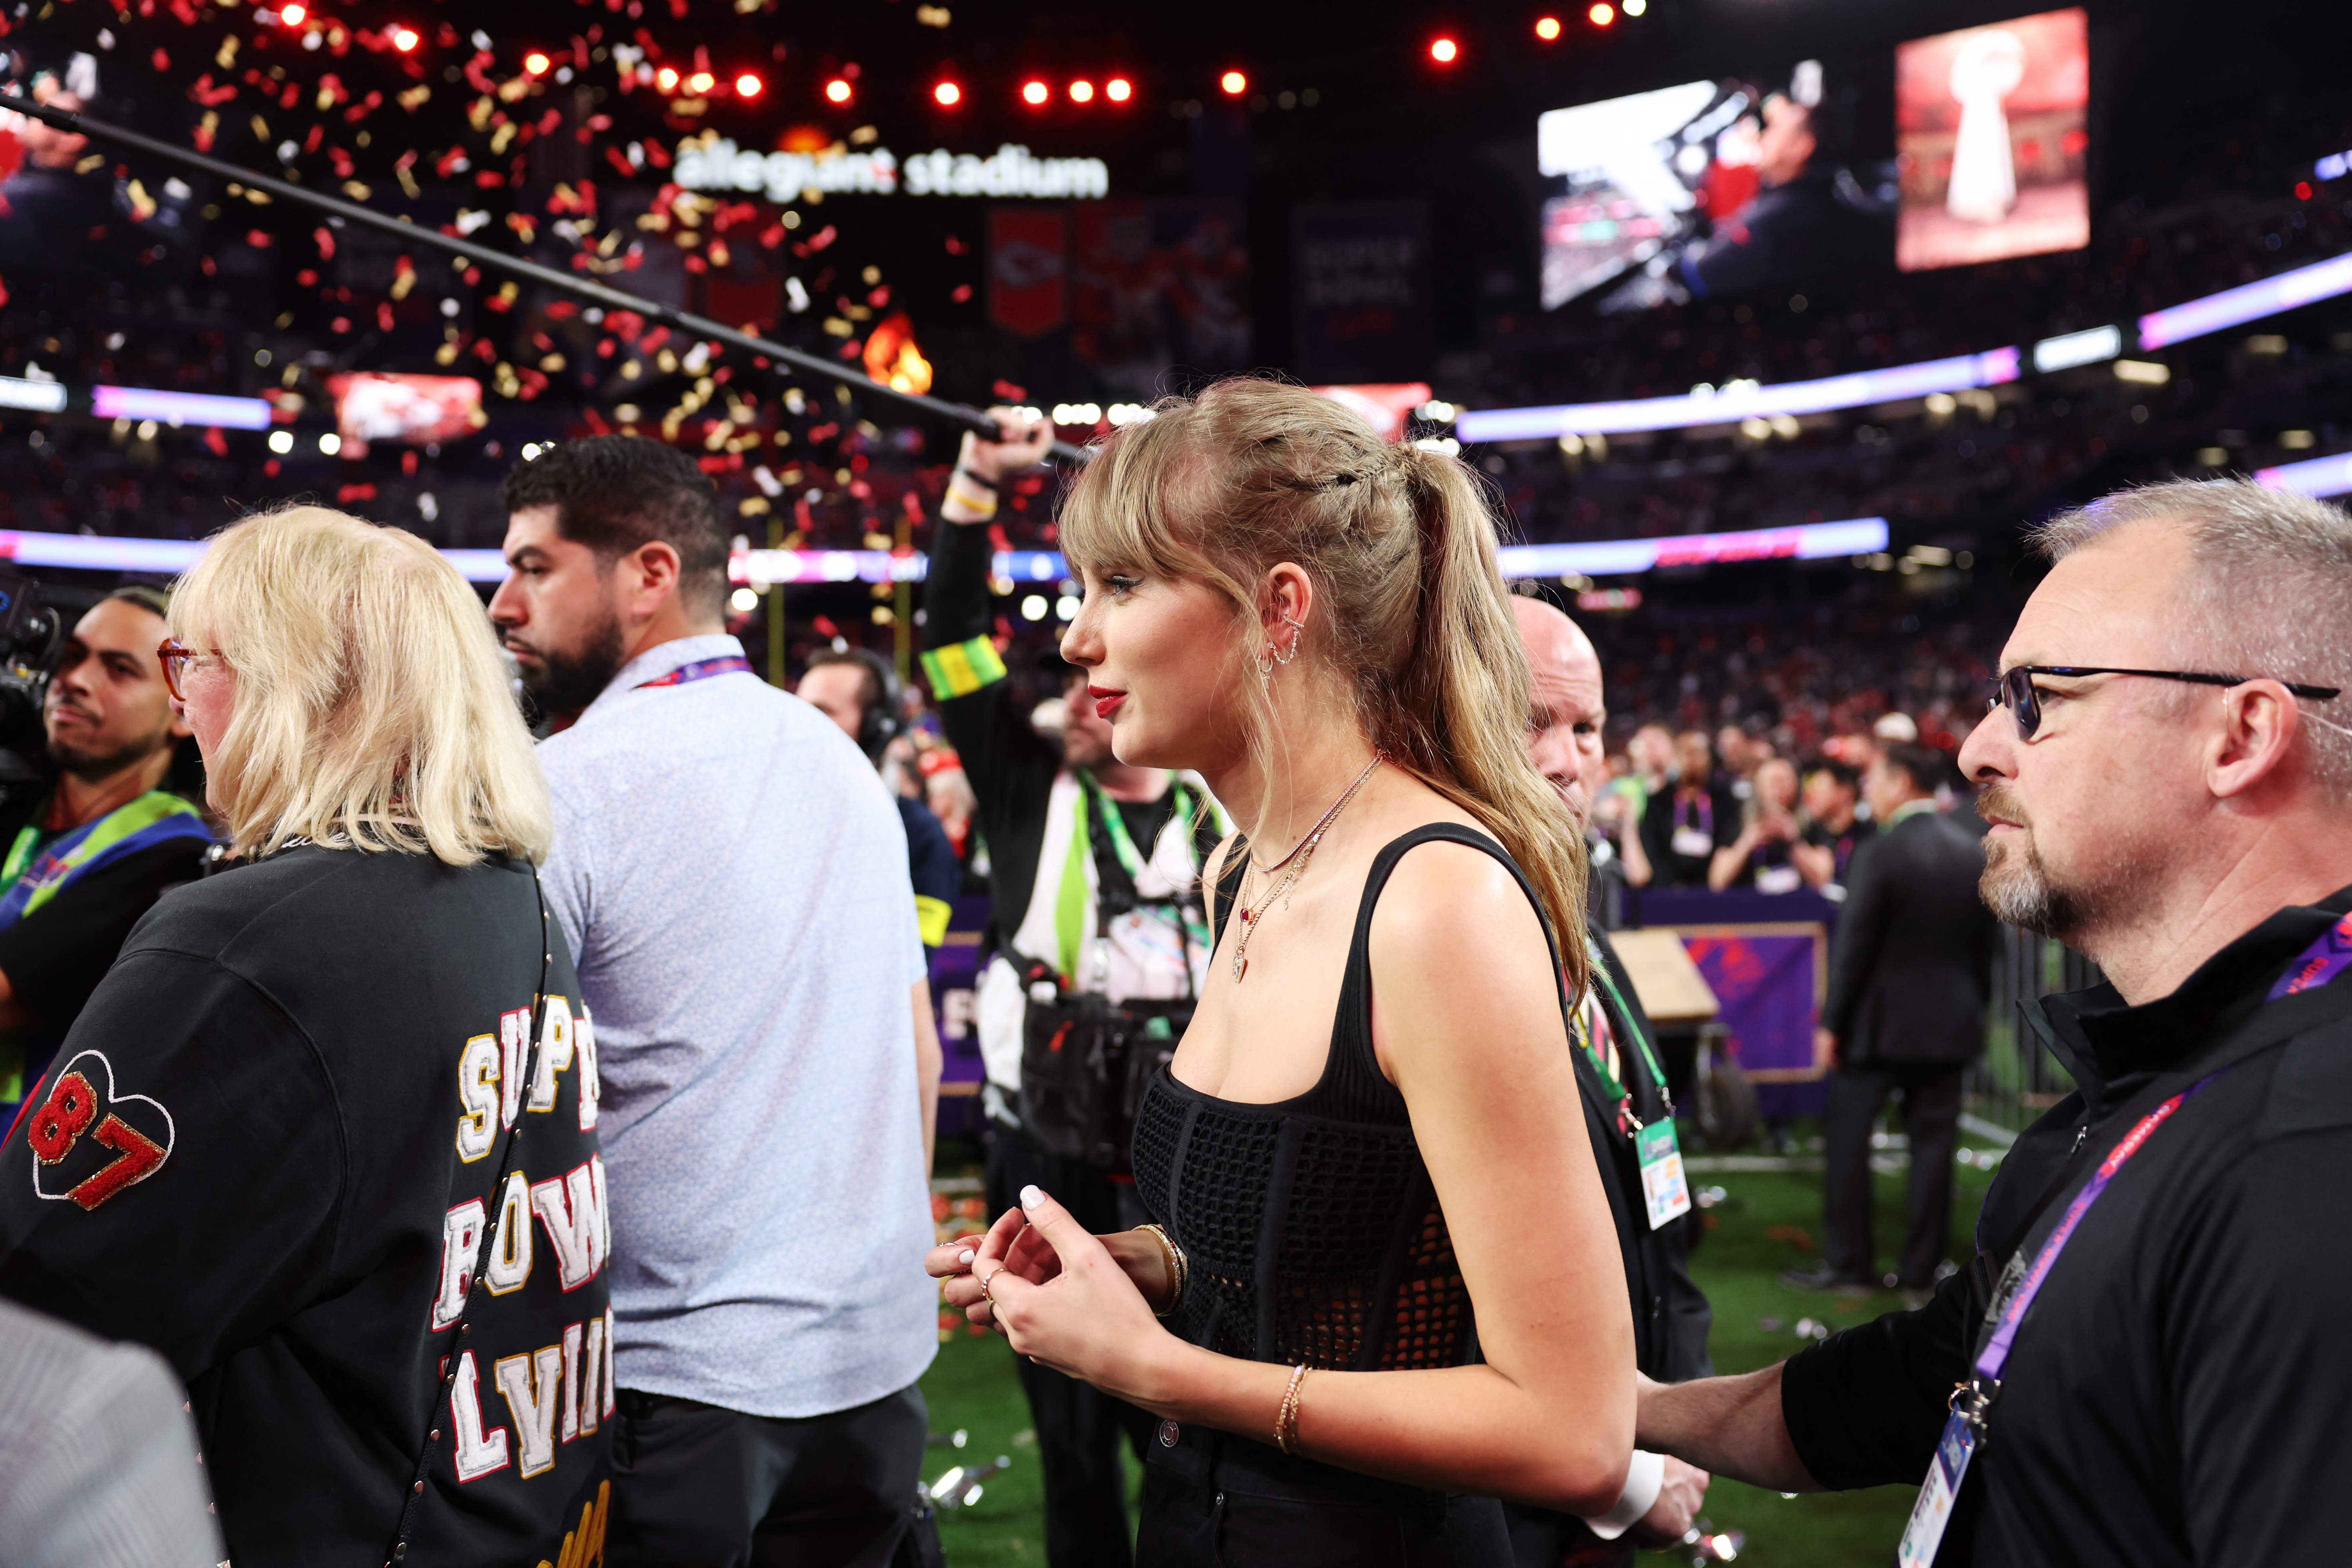 Taylor Swift's relationship with the charismatic Chiefs star Travis Kelce has been a boon to television ratings at the Super Bowl, her every move offering headline fodder.